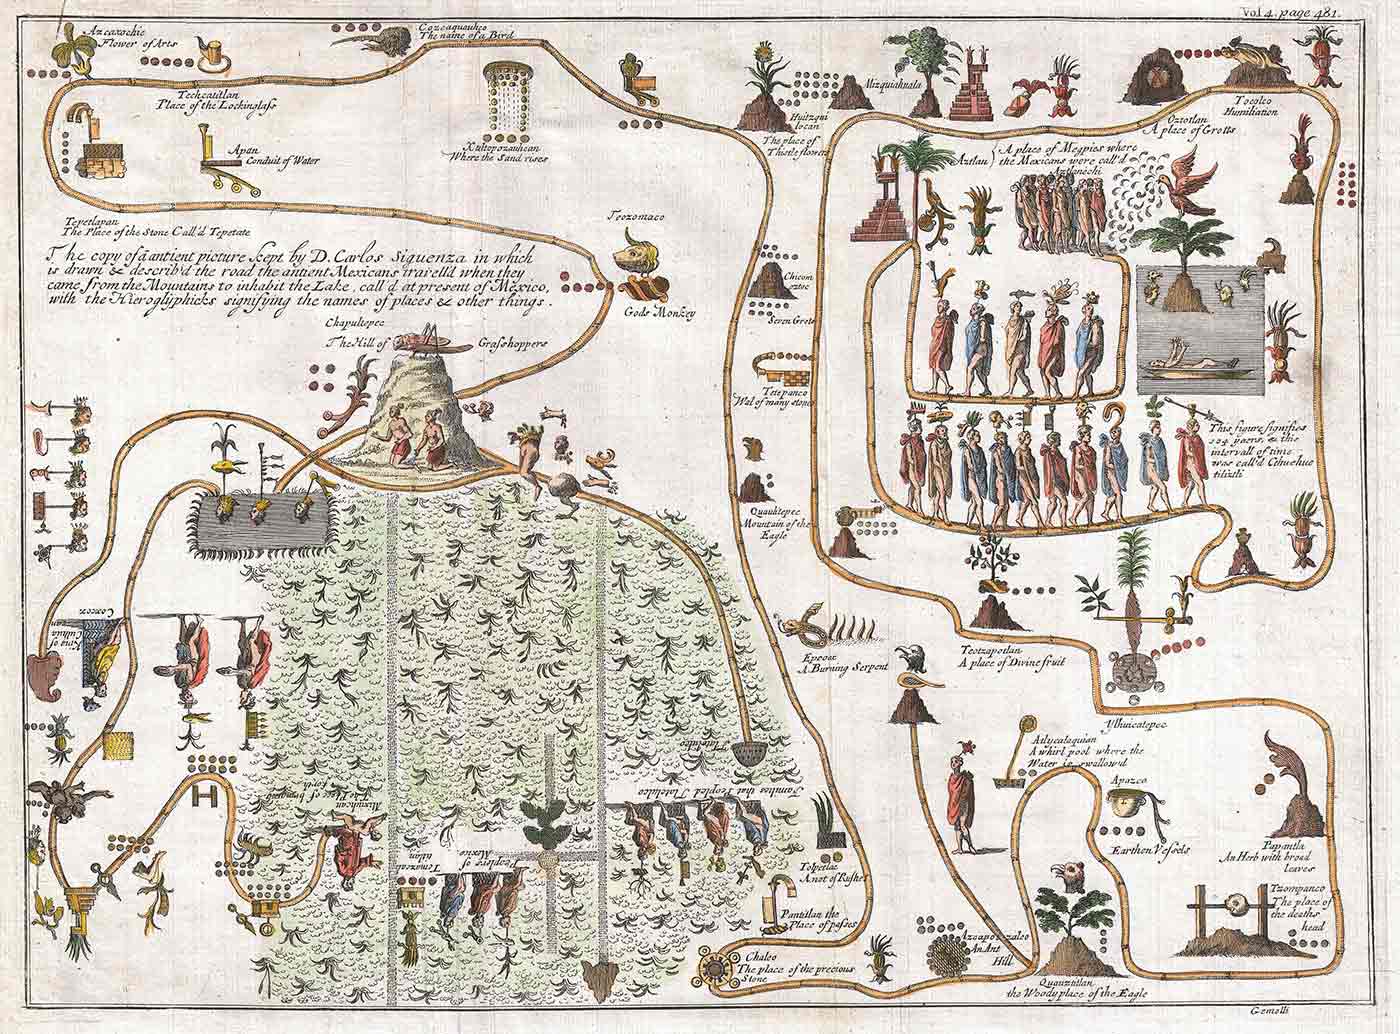 1704 Gemelli Map of the Aztec Migration from Aztlan to Chapultapec.